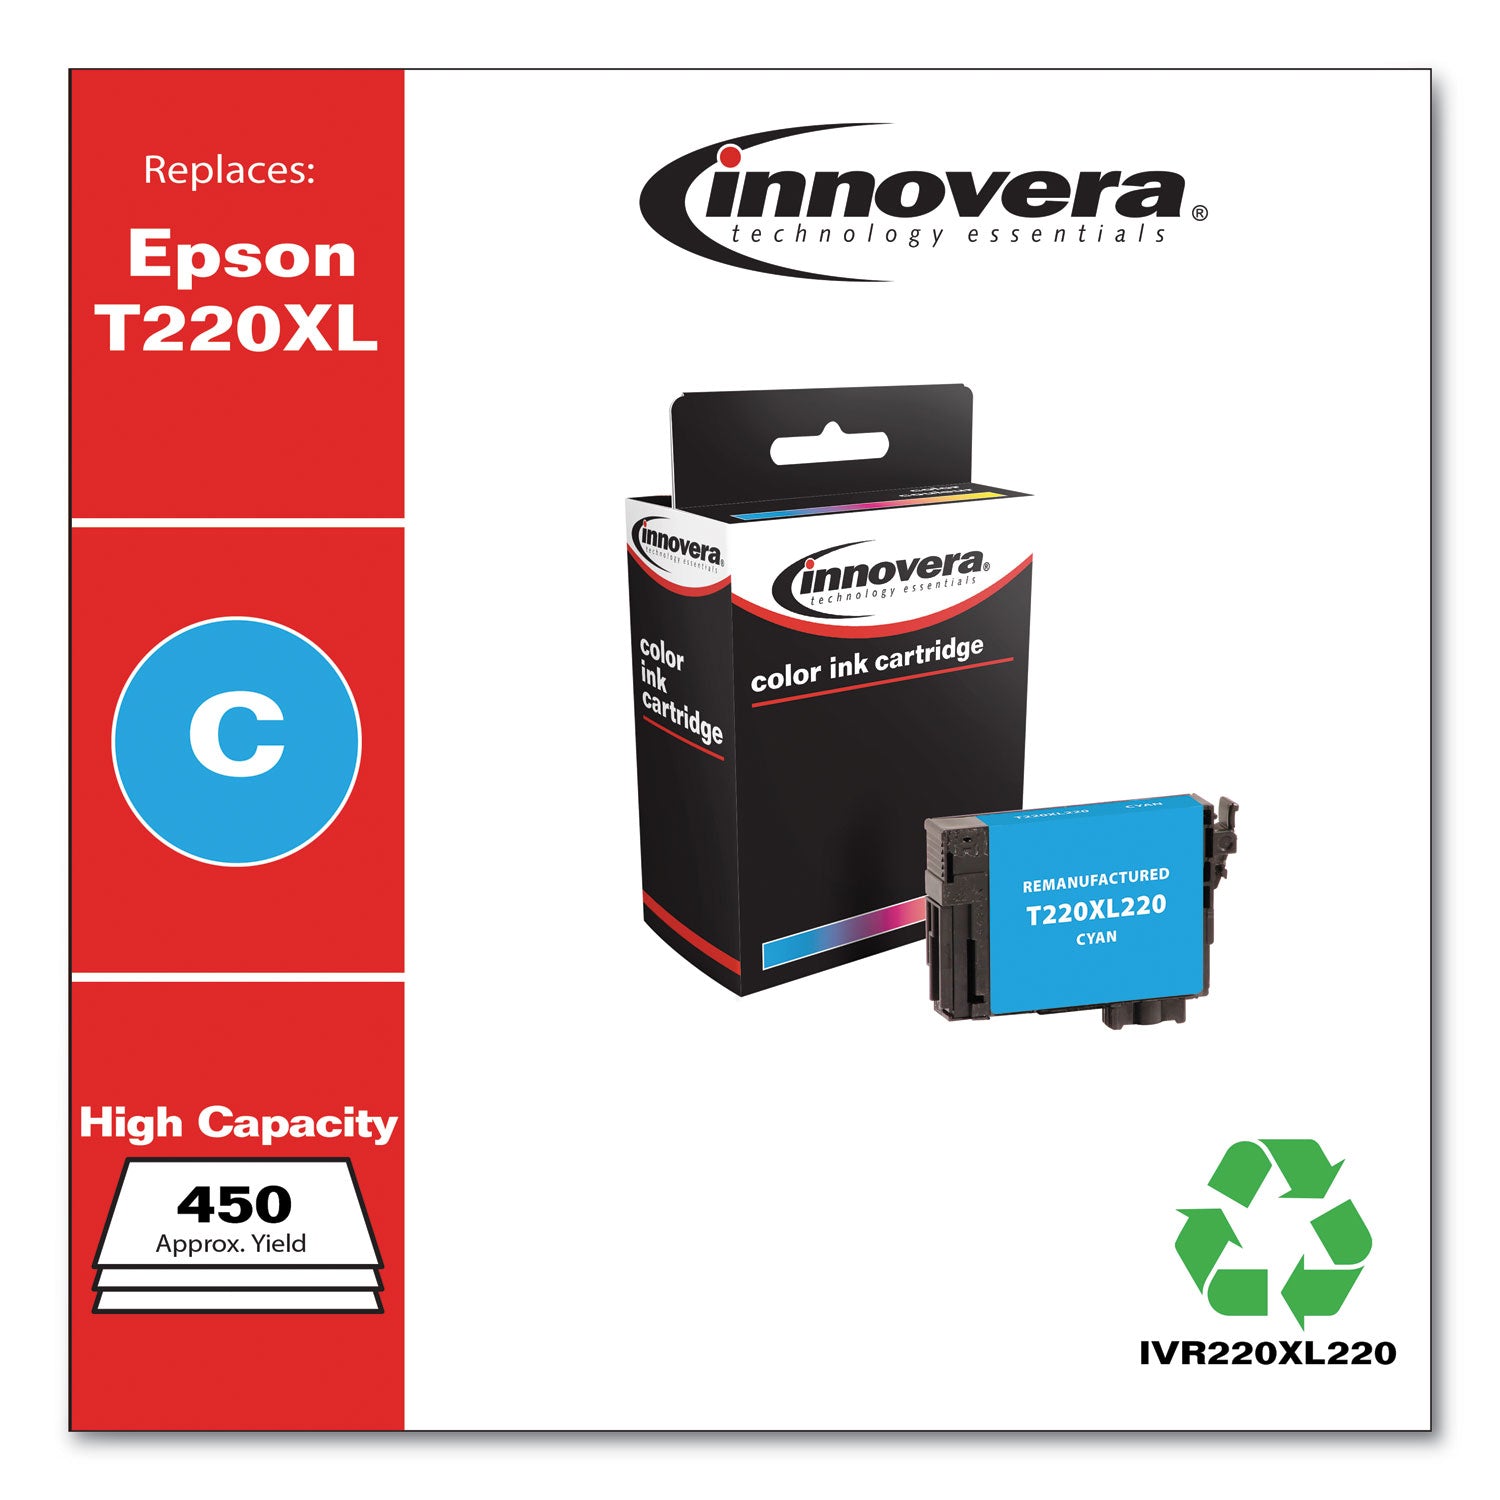 remanufactured-cyan-high-yield-ink-replacement-for-t220xl-t220xl220-450-page-yield_ivr220xl220 - 2